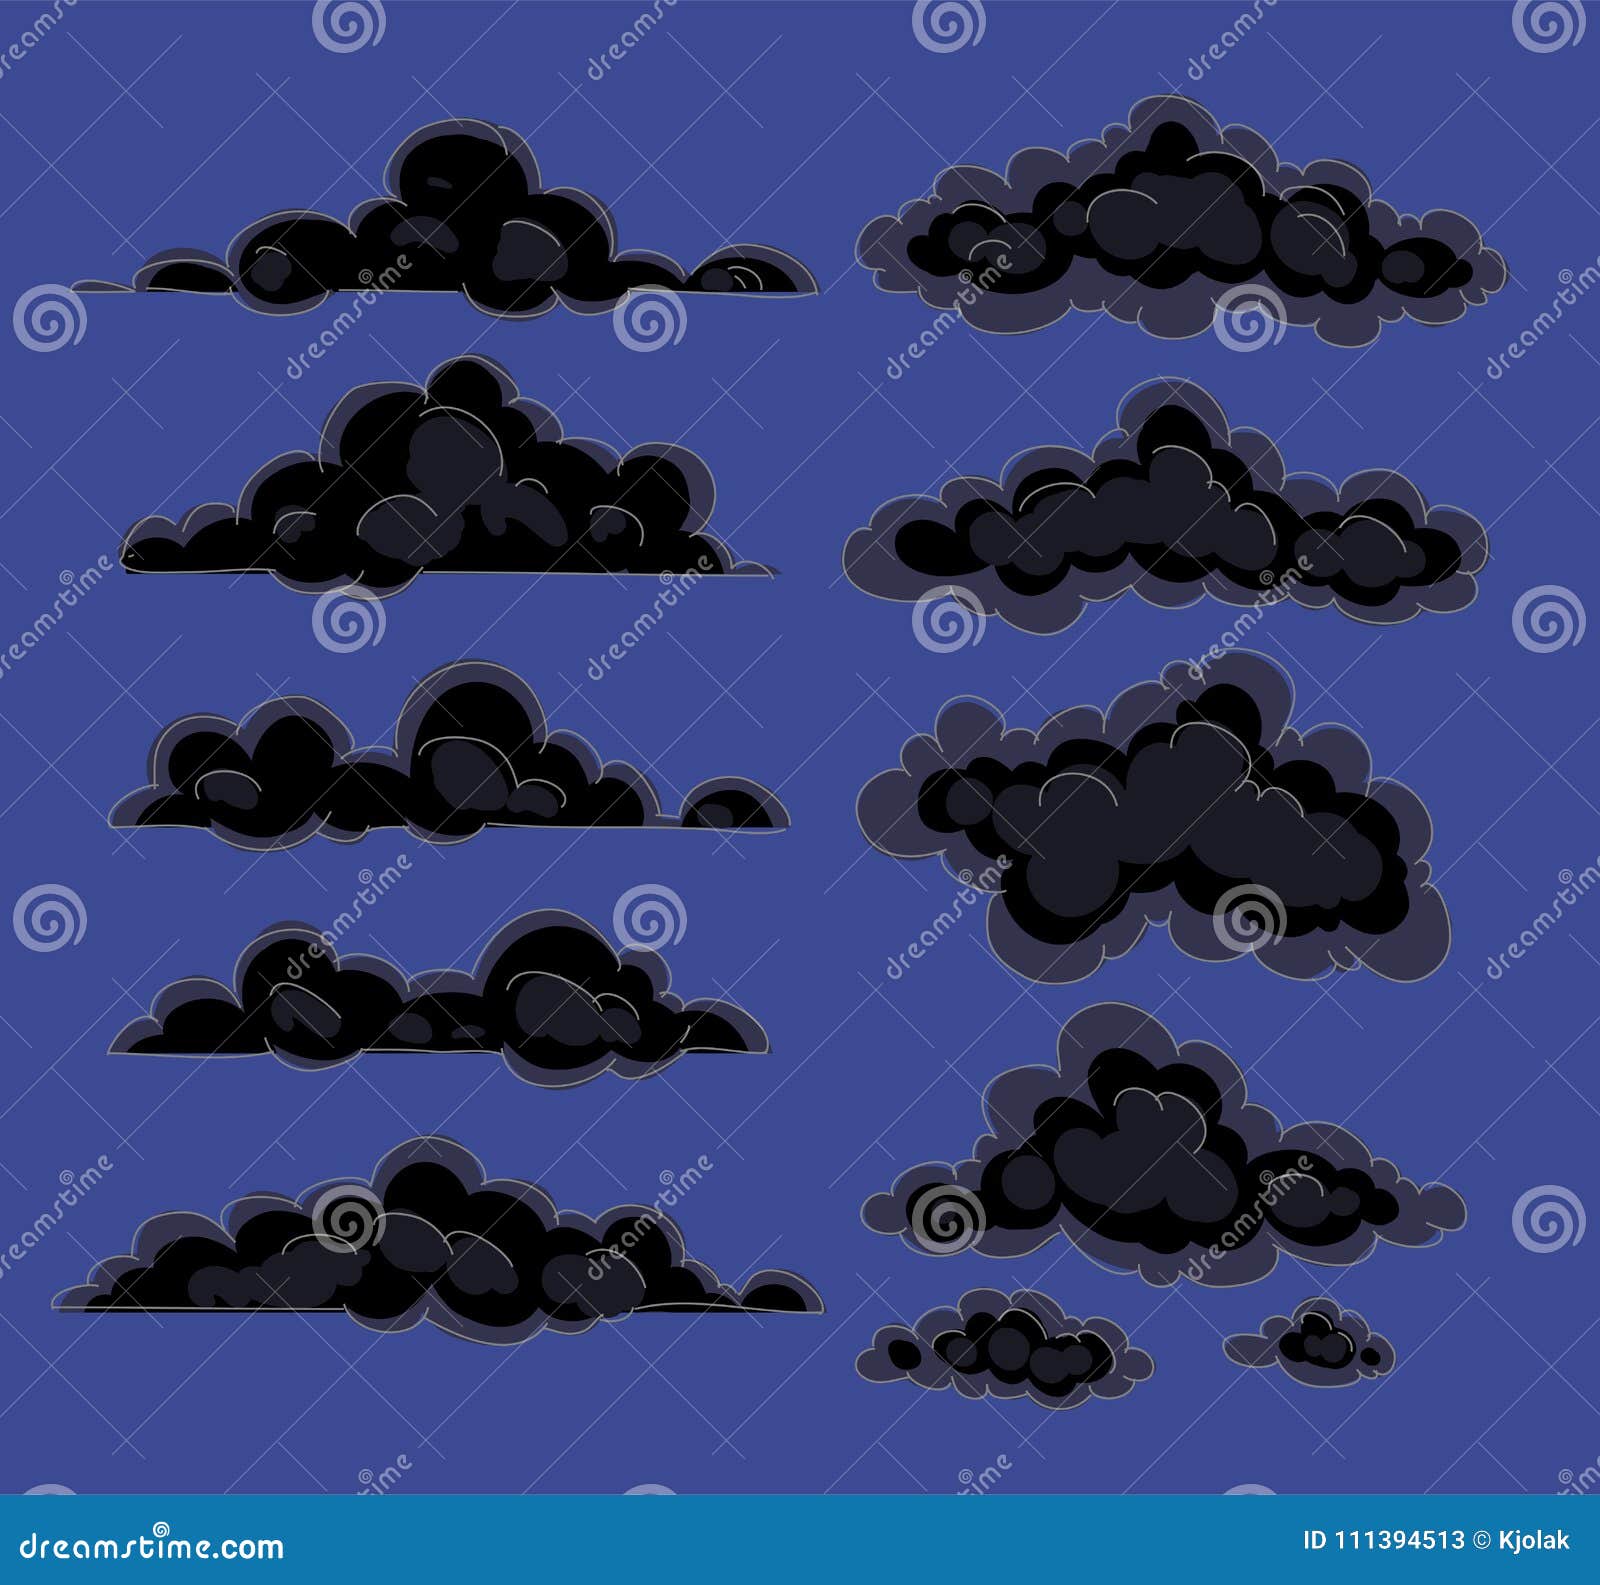 Black Clouds on a Dark Background. Drawing by Hand. Stock Vector